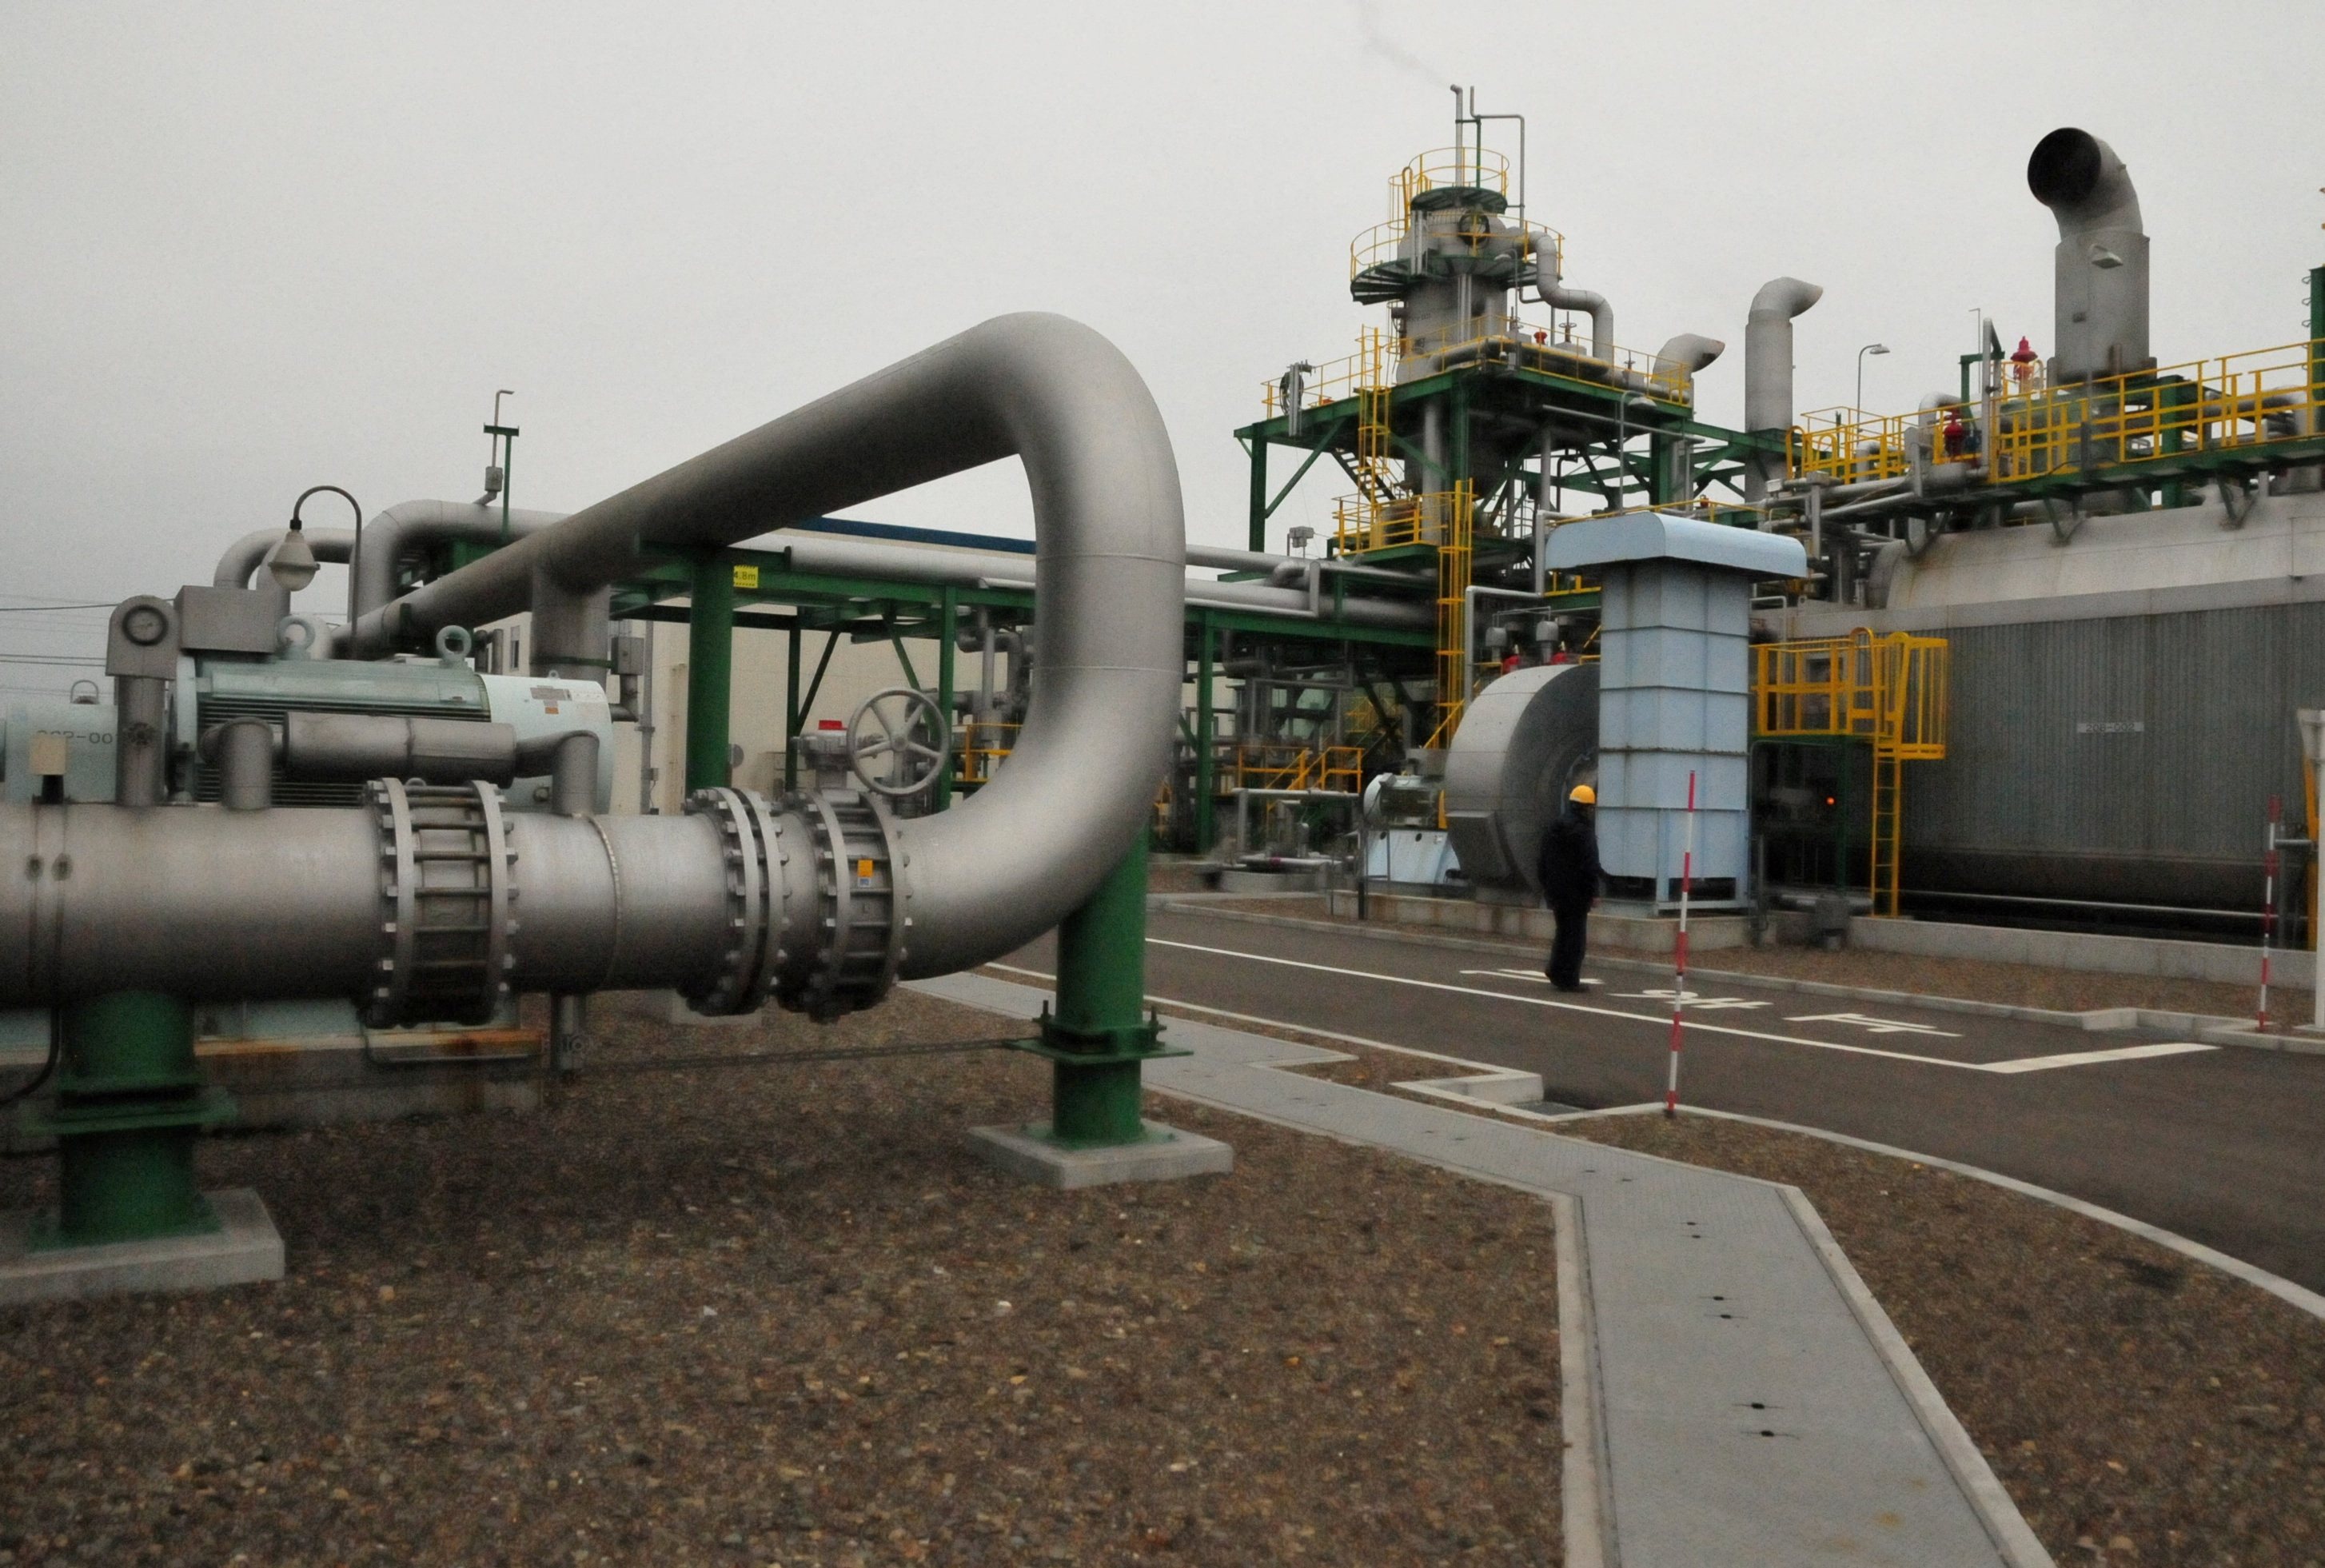 Pipe for tranporting CO2 pictured at CCS test site in Tomakomai